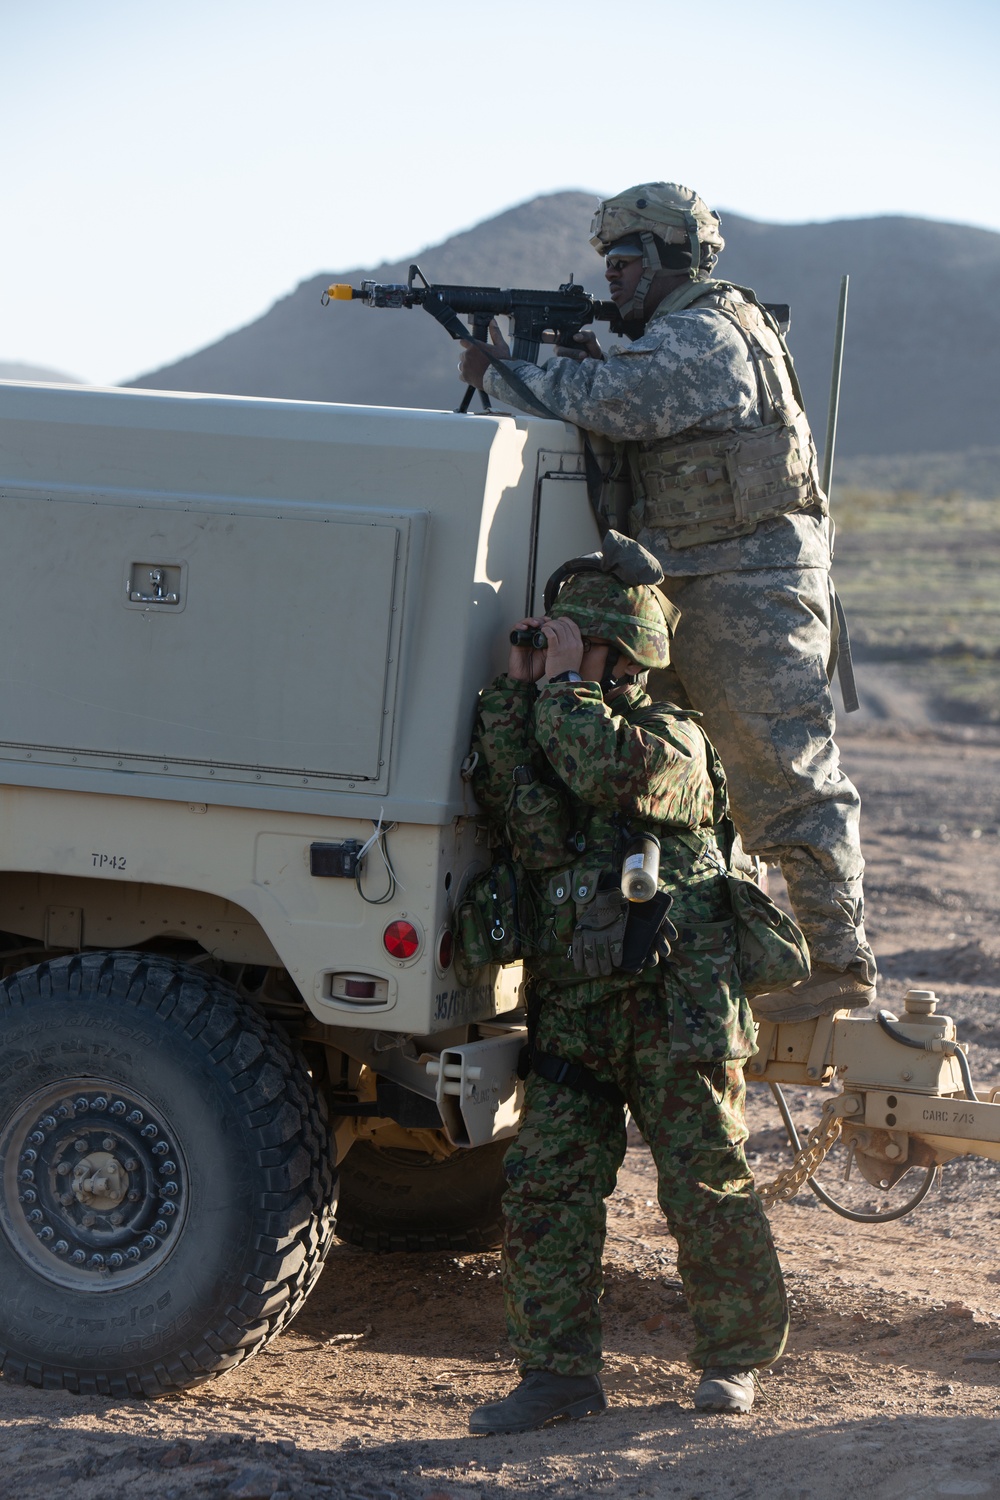 U.S. Marines, Soldiers and JGSDF Soldiers train together at the National Training Center